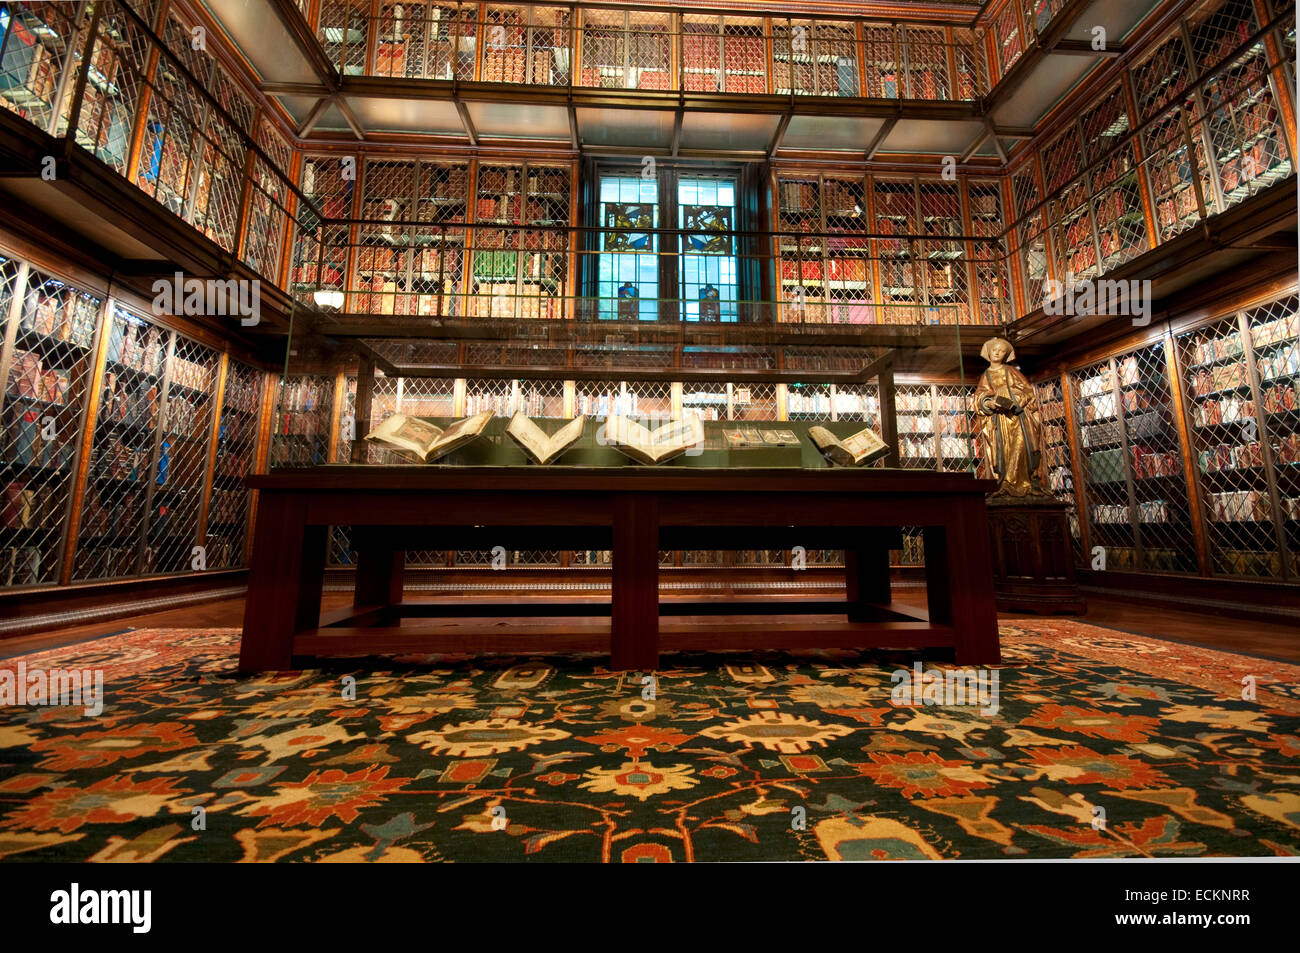 Usa, New York, Manhattan, Morgan Library and Museum Banque D'Images